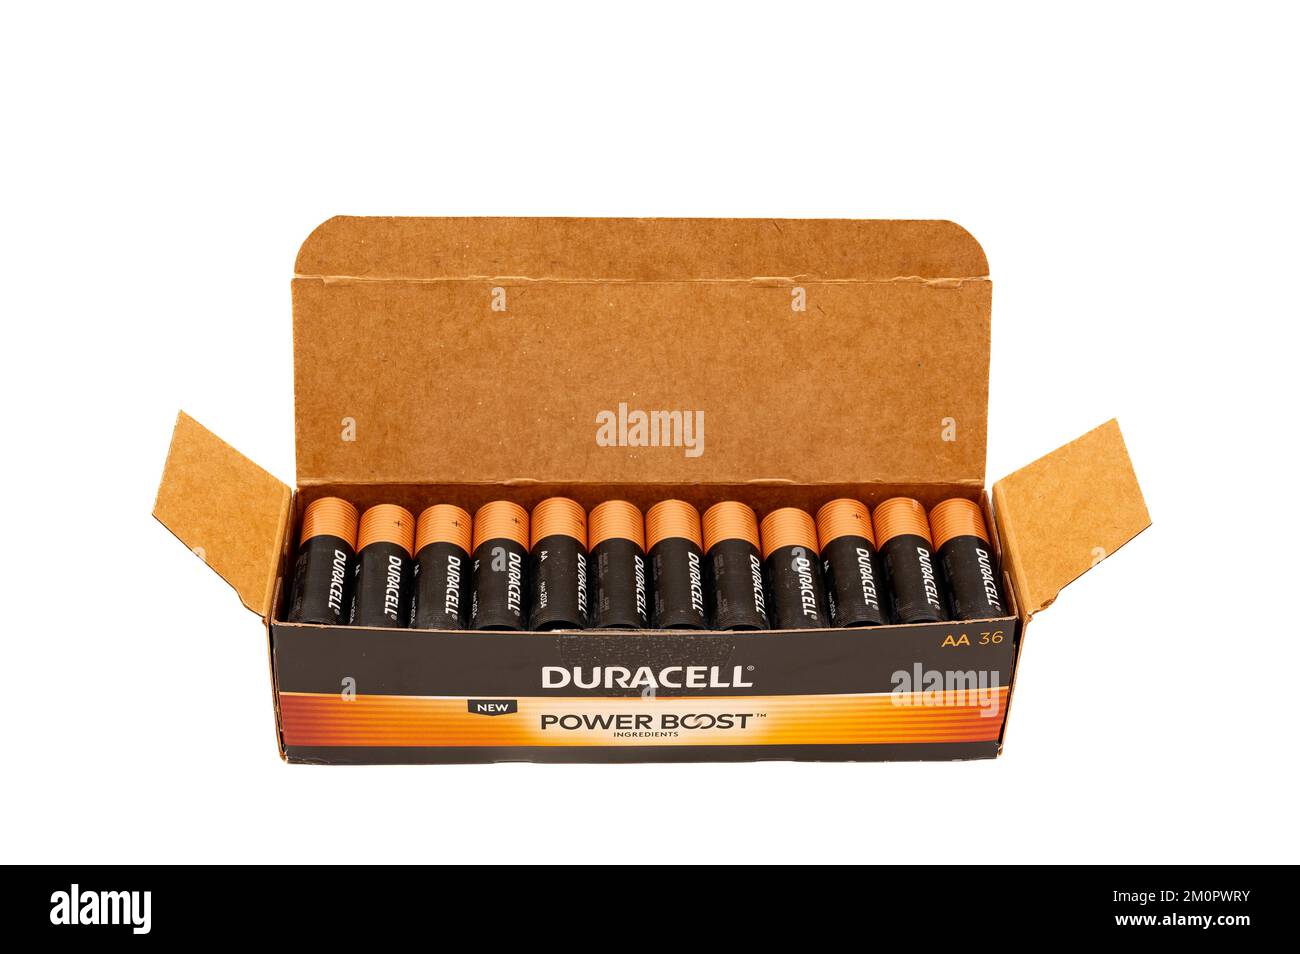 A box of 36 Duracell power boost AA alkaline batteries with power boost ingredients, isolated on white Stock Photo